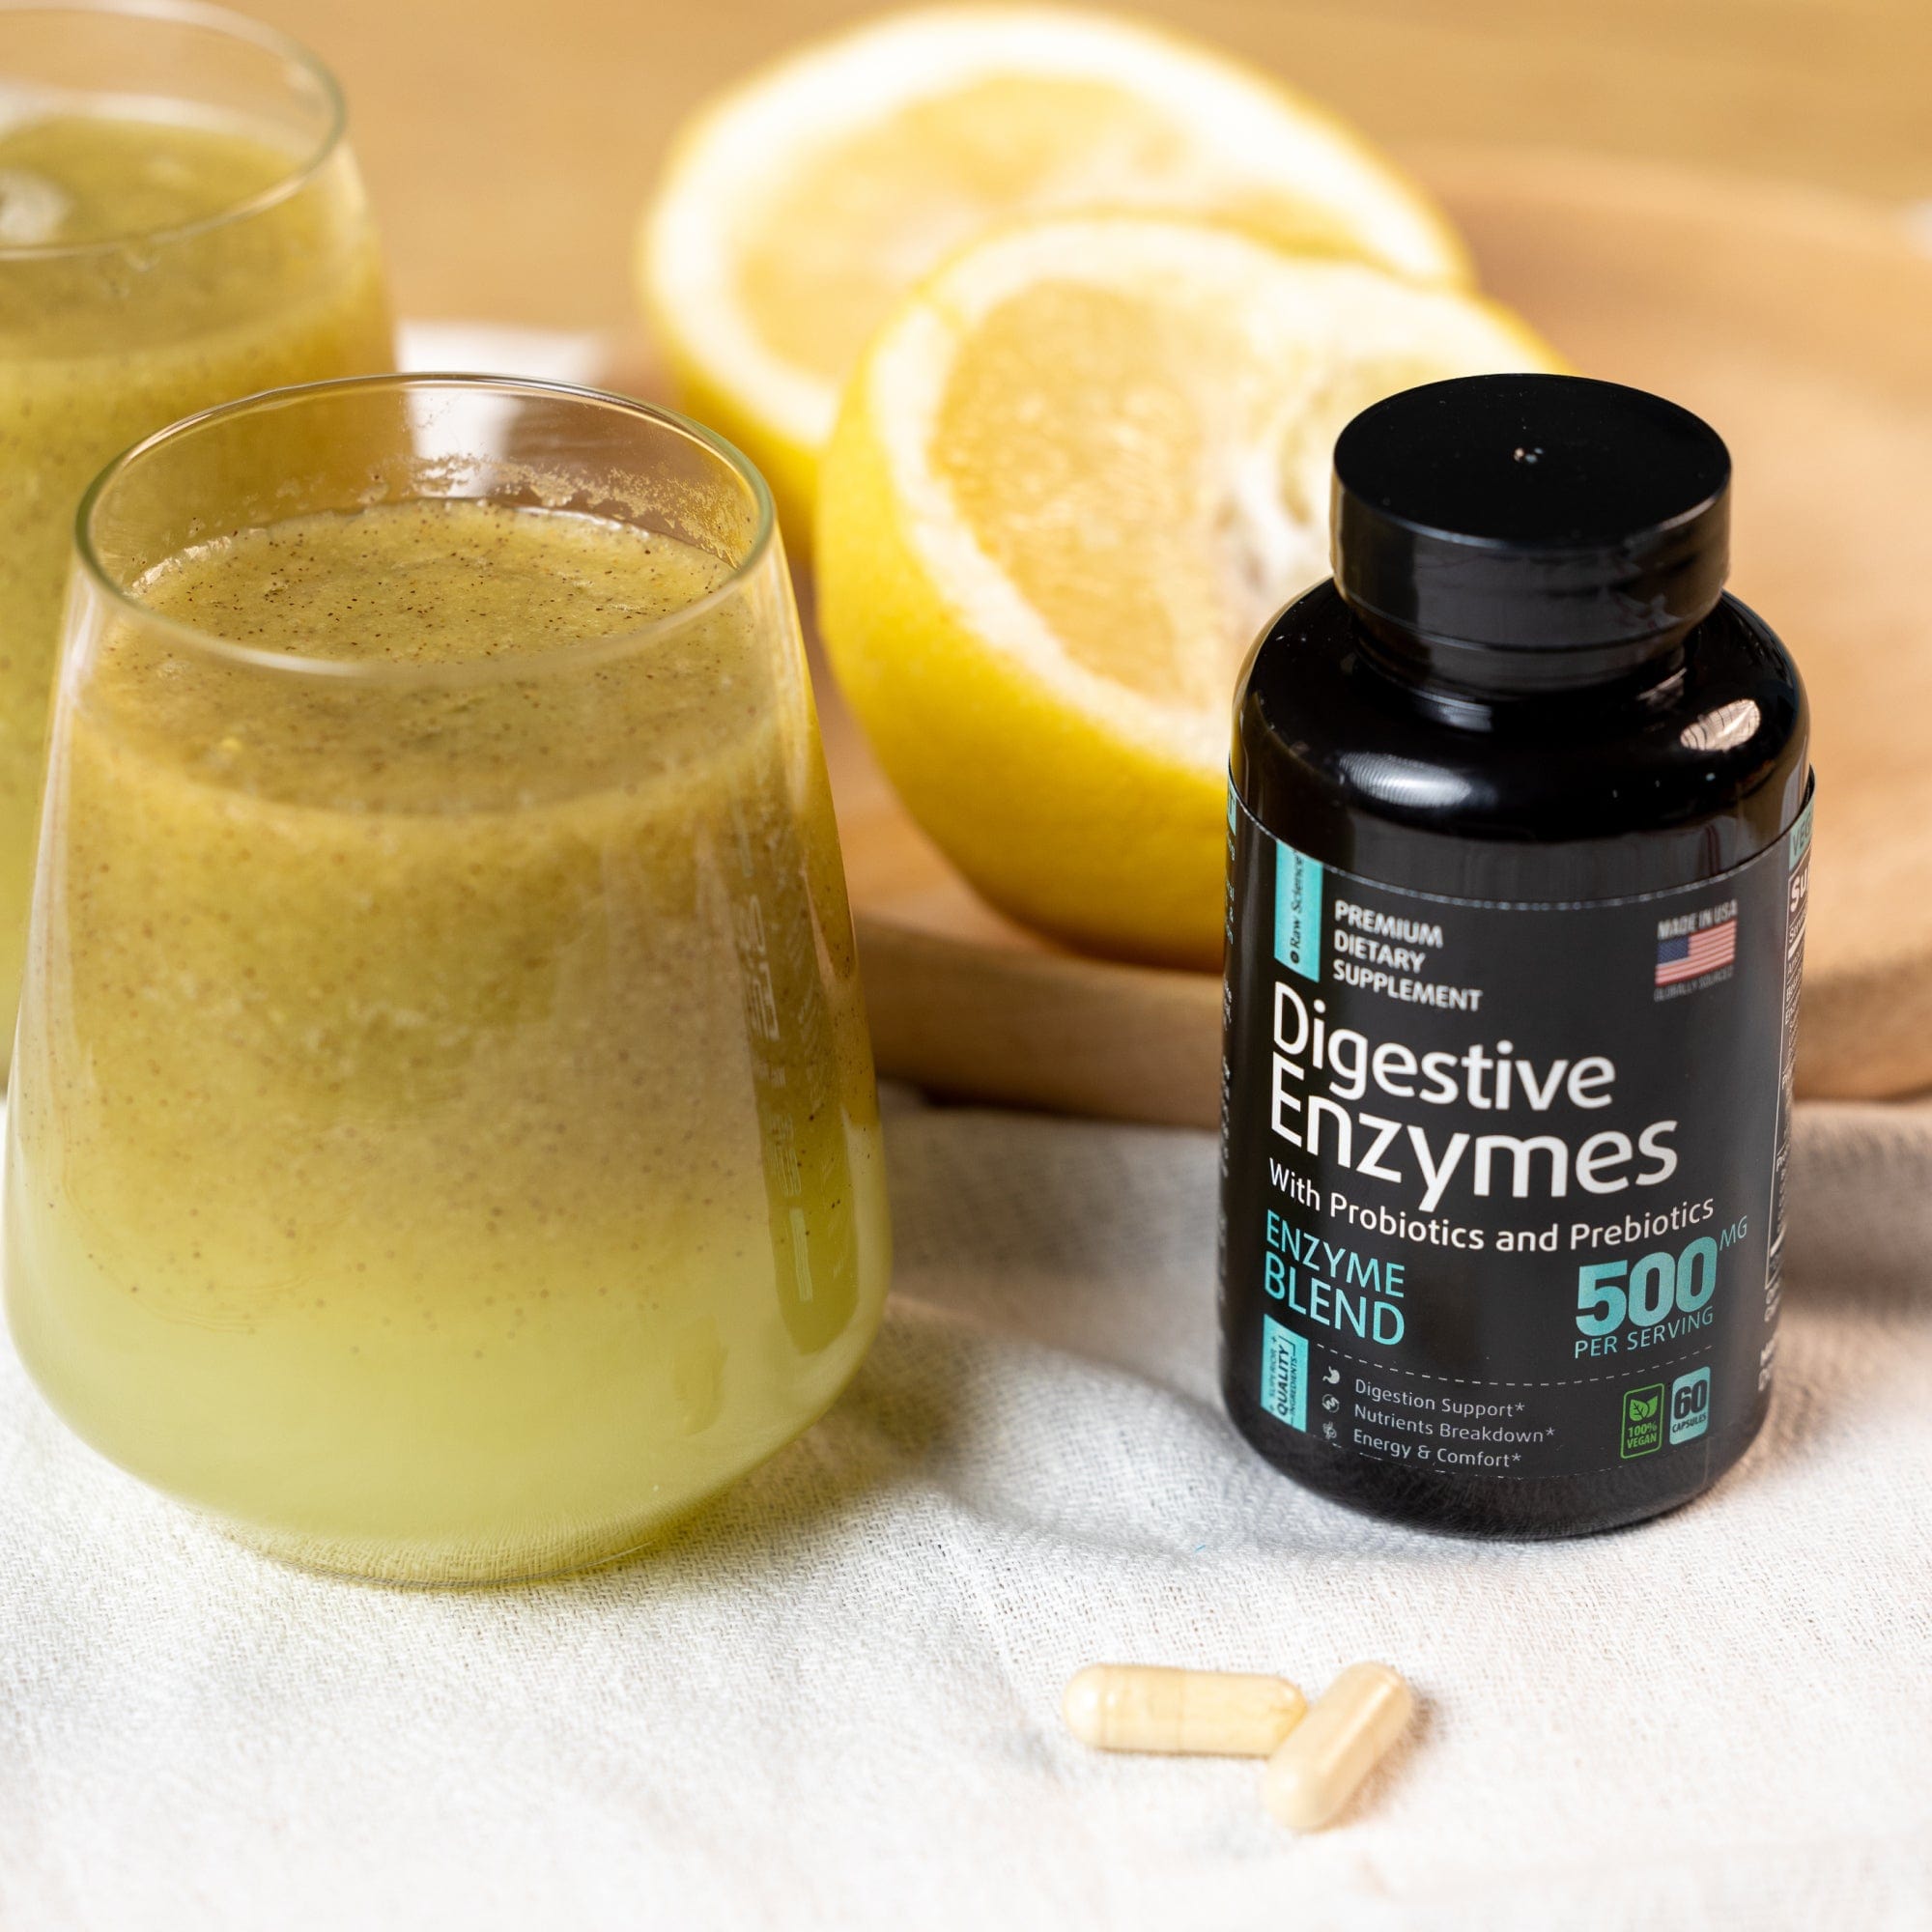 Digestive Enzyme Supplements with Probiotics Buy 3 Get 1 Free